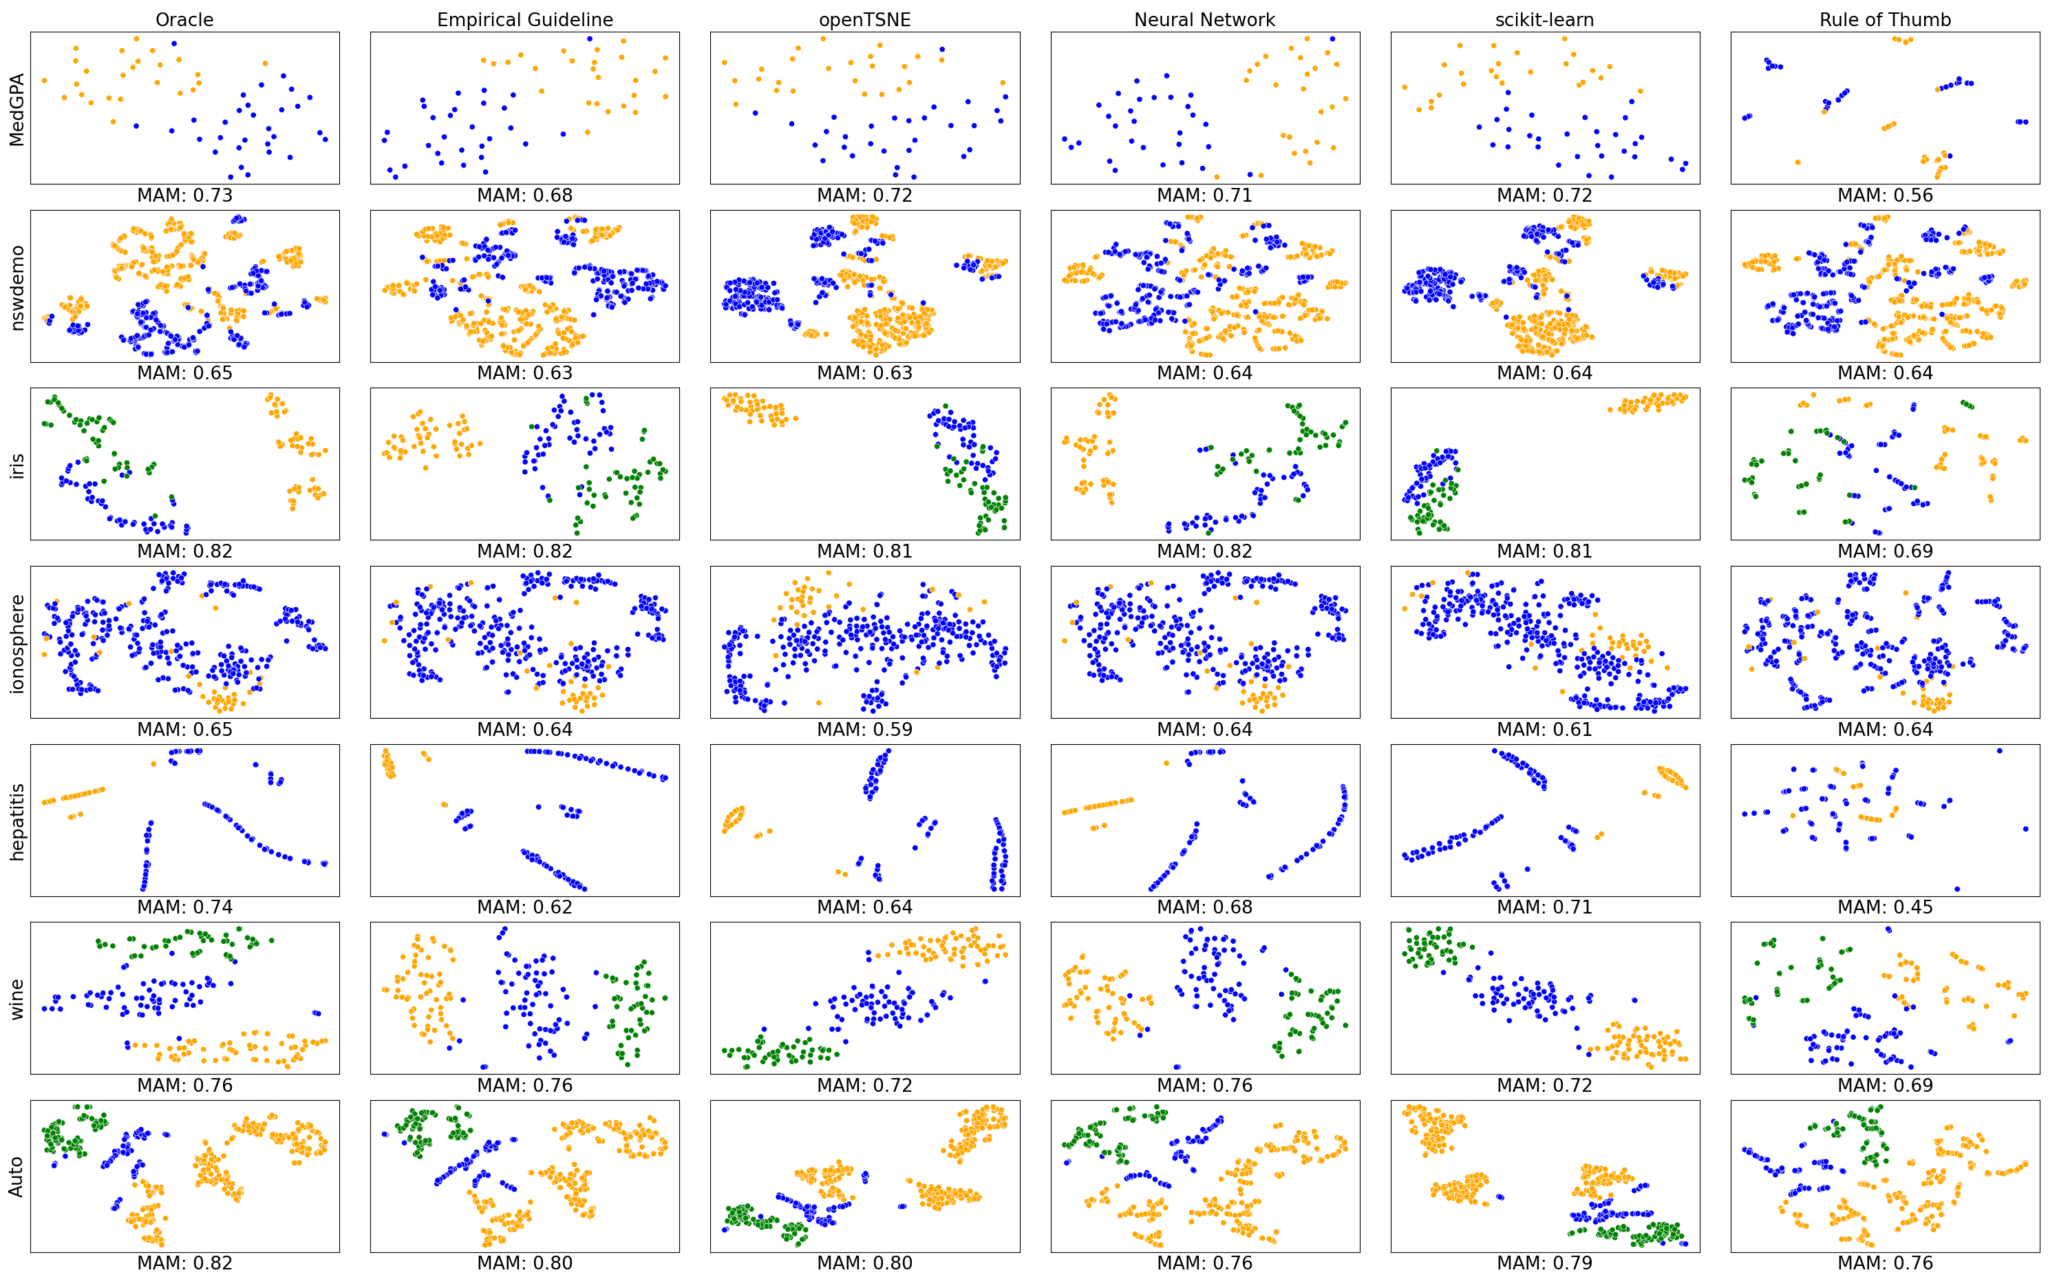 A comparison of t-SNE visualizations of seven data sets created using difference t-SNE guidance and defaults.